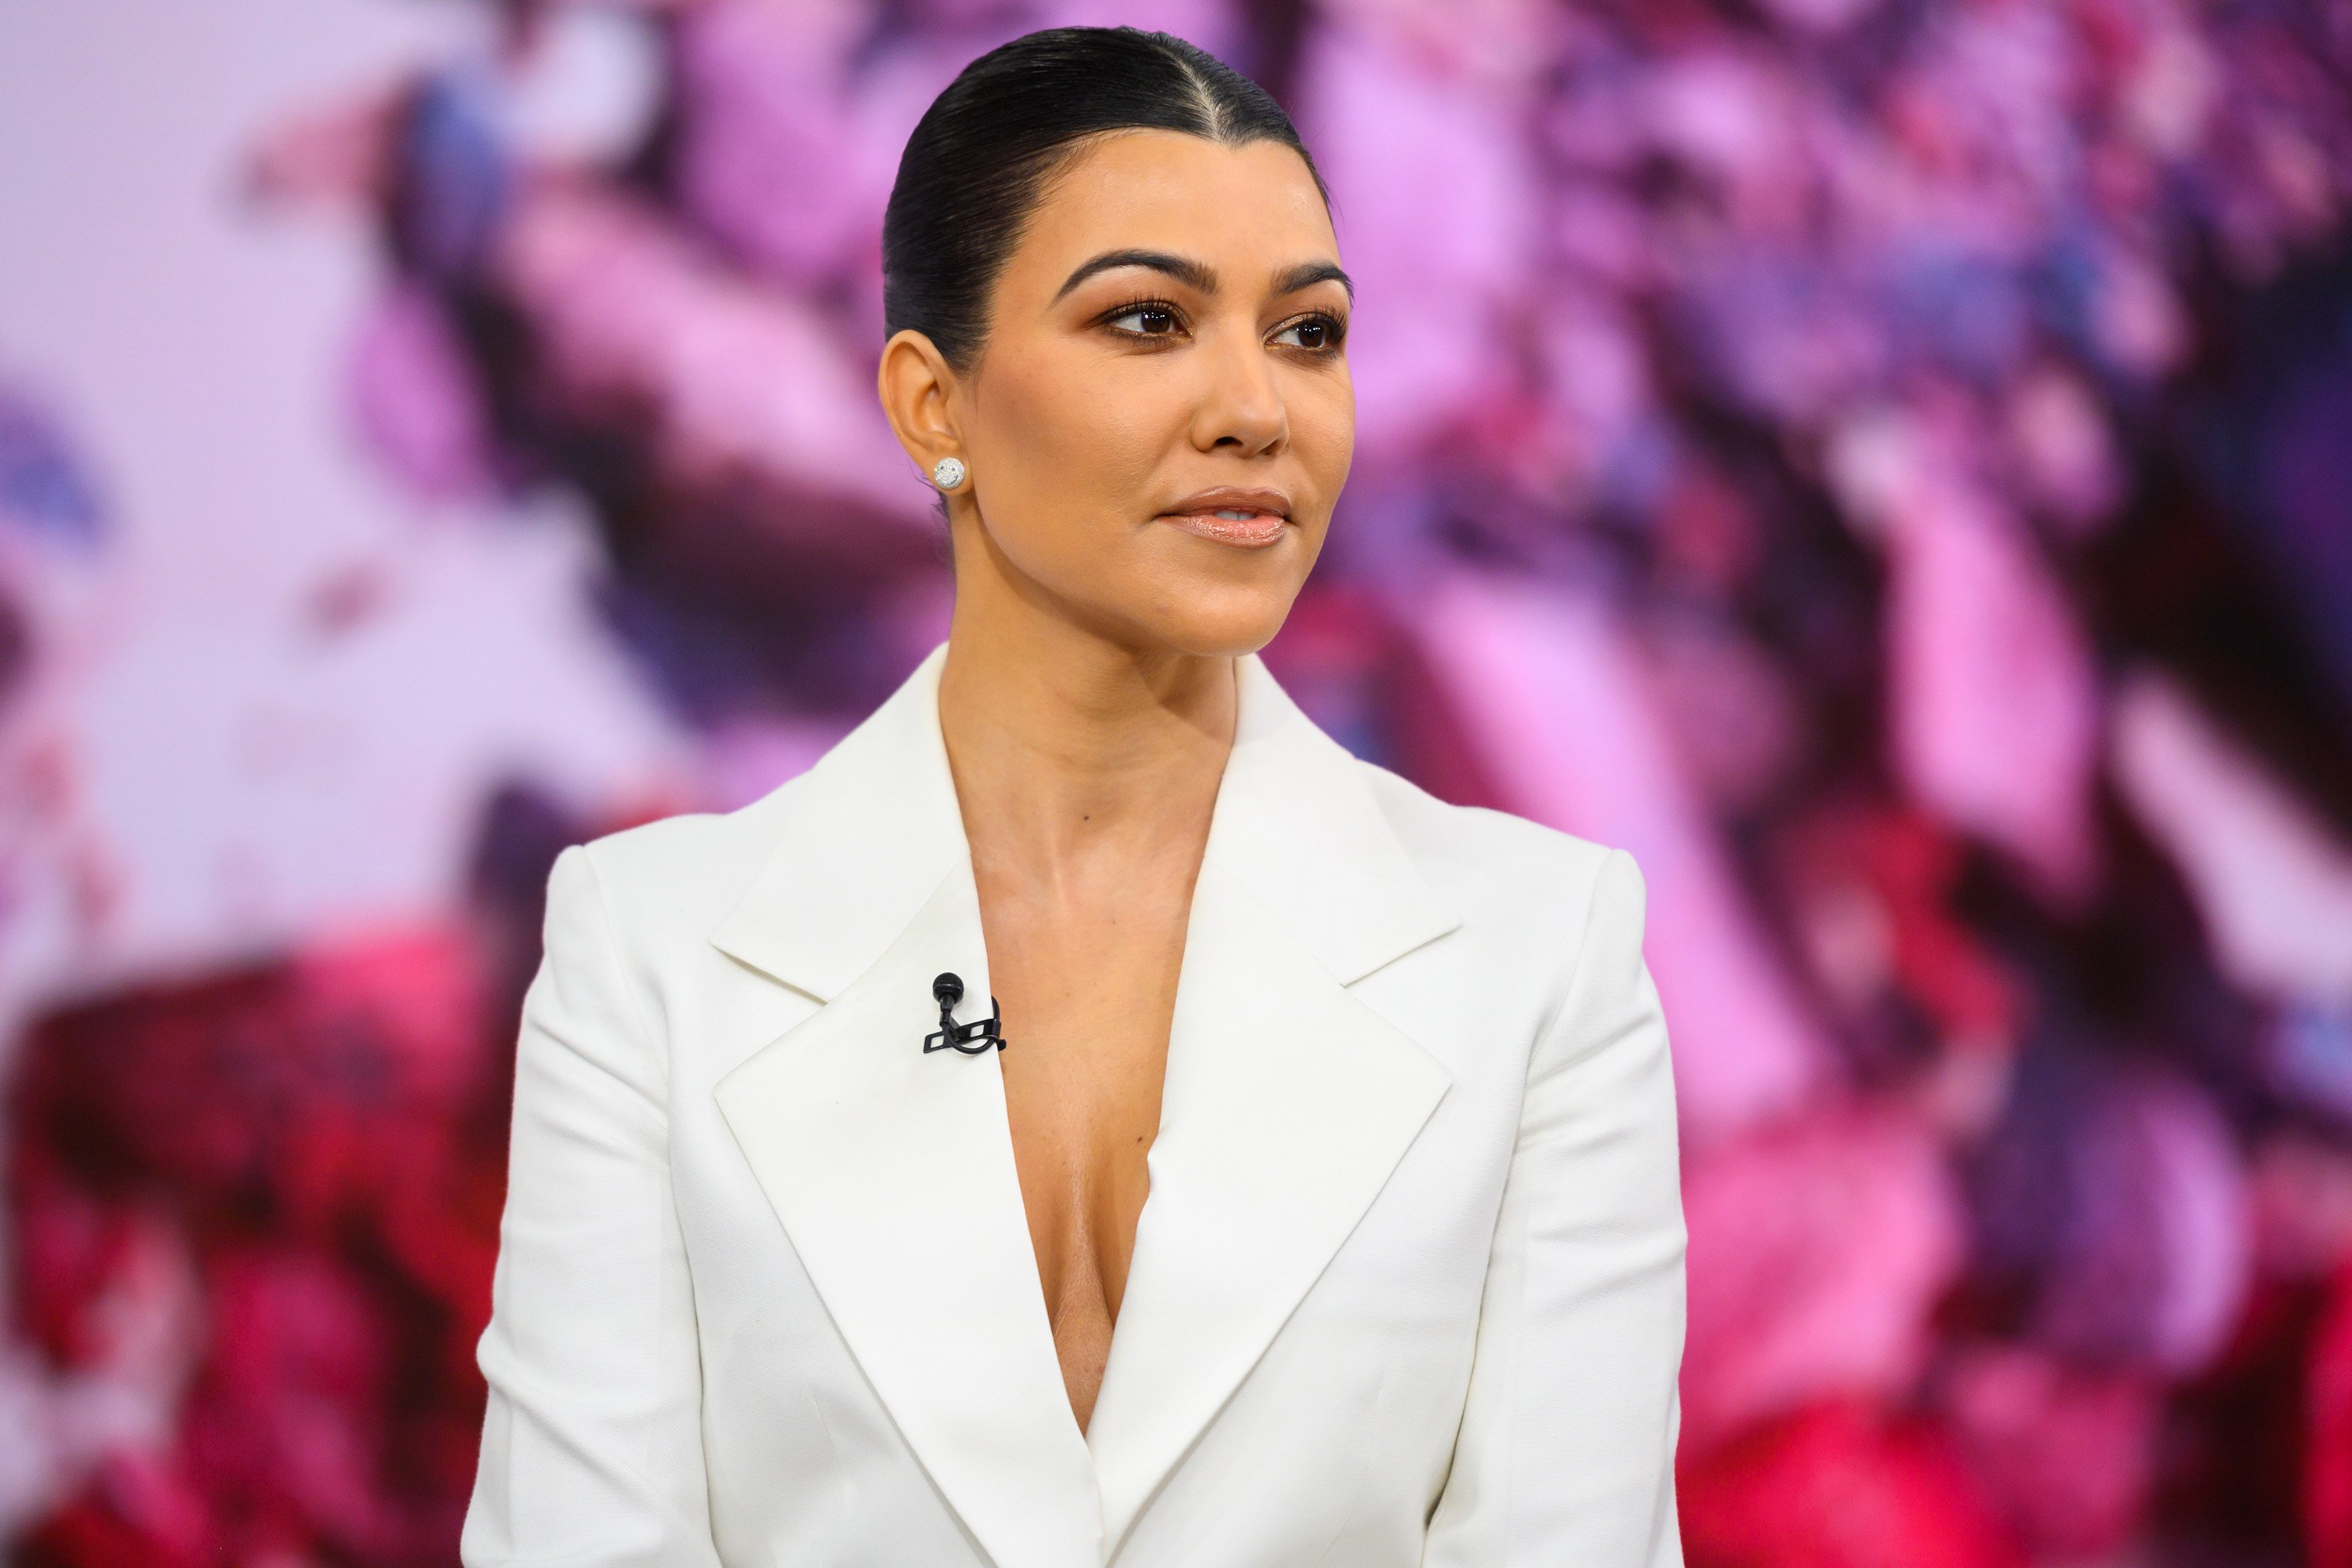 Kourtney Kardashian pictured on the set of “Today” on Thursday, February 7, 2019. | Source: Getty Images